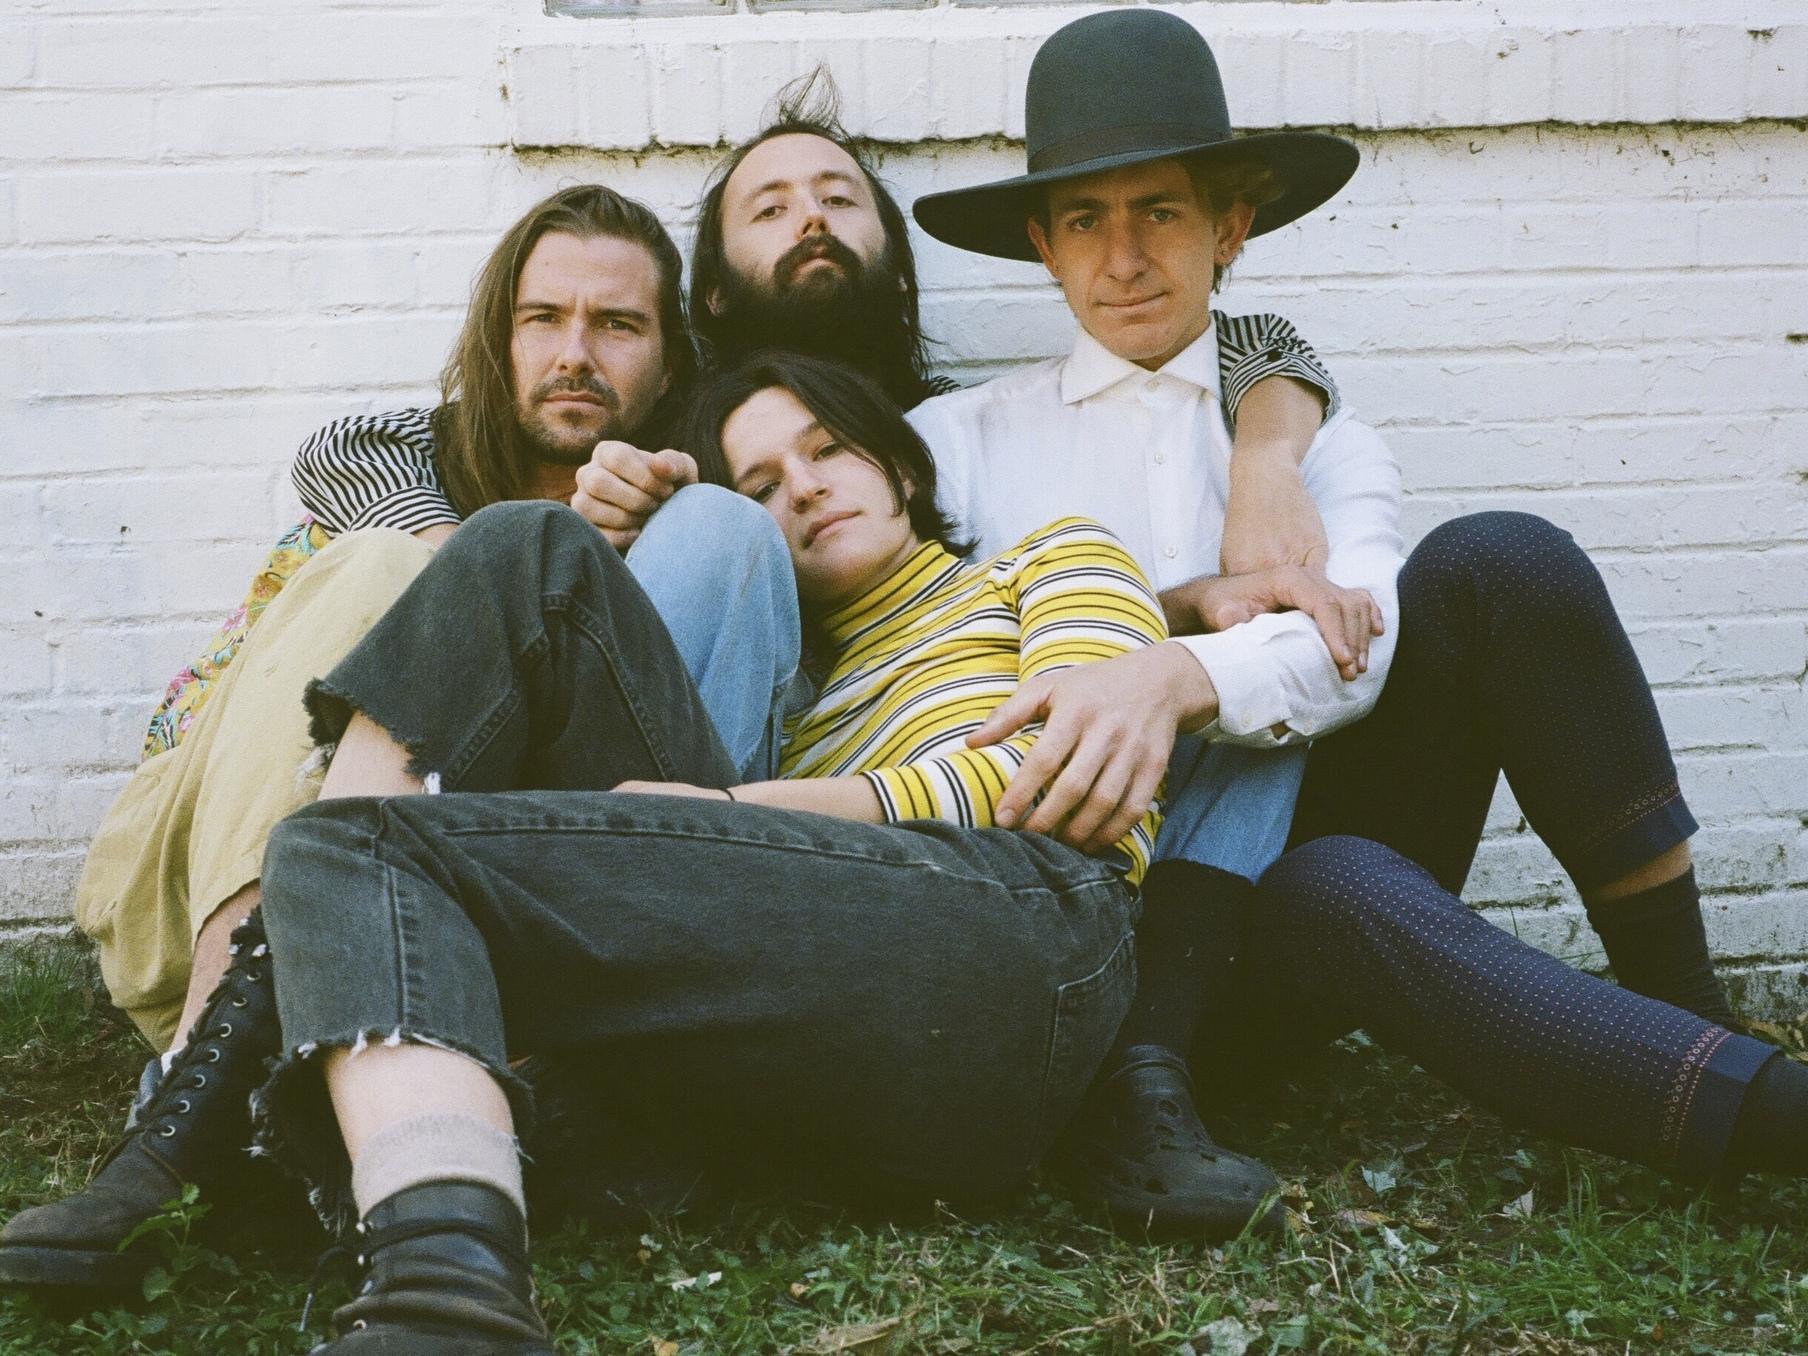 Big Thief's Adrianne Lenker, centre front: ‘I’m sure I’m still feeling things that have been passed down from my great-great-grandmother. And with each generation, it seems that there’s a little bit more work done to open that part back up’